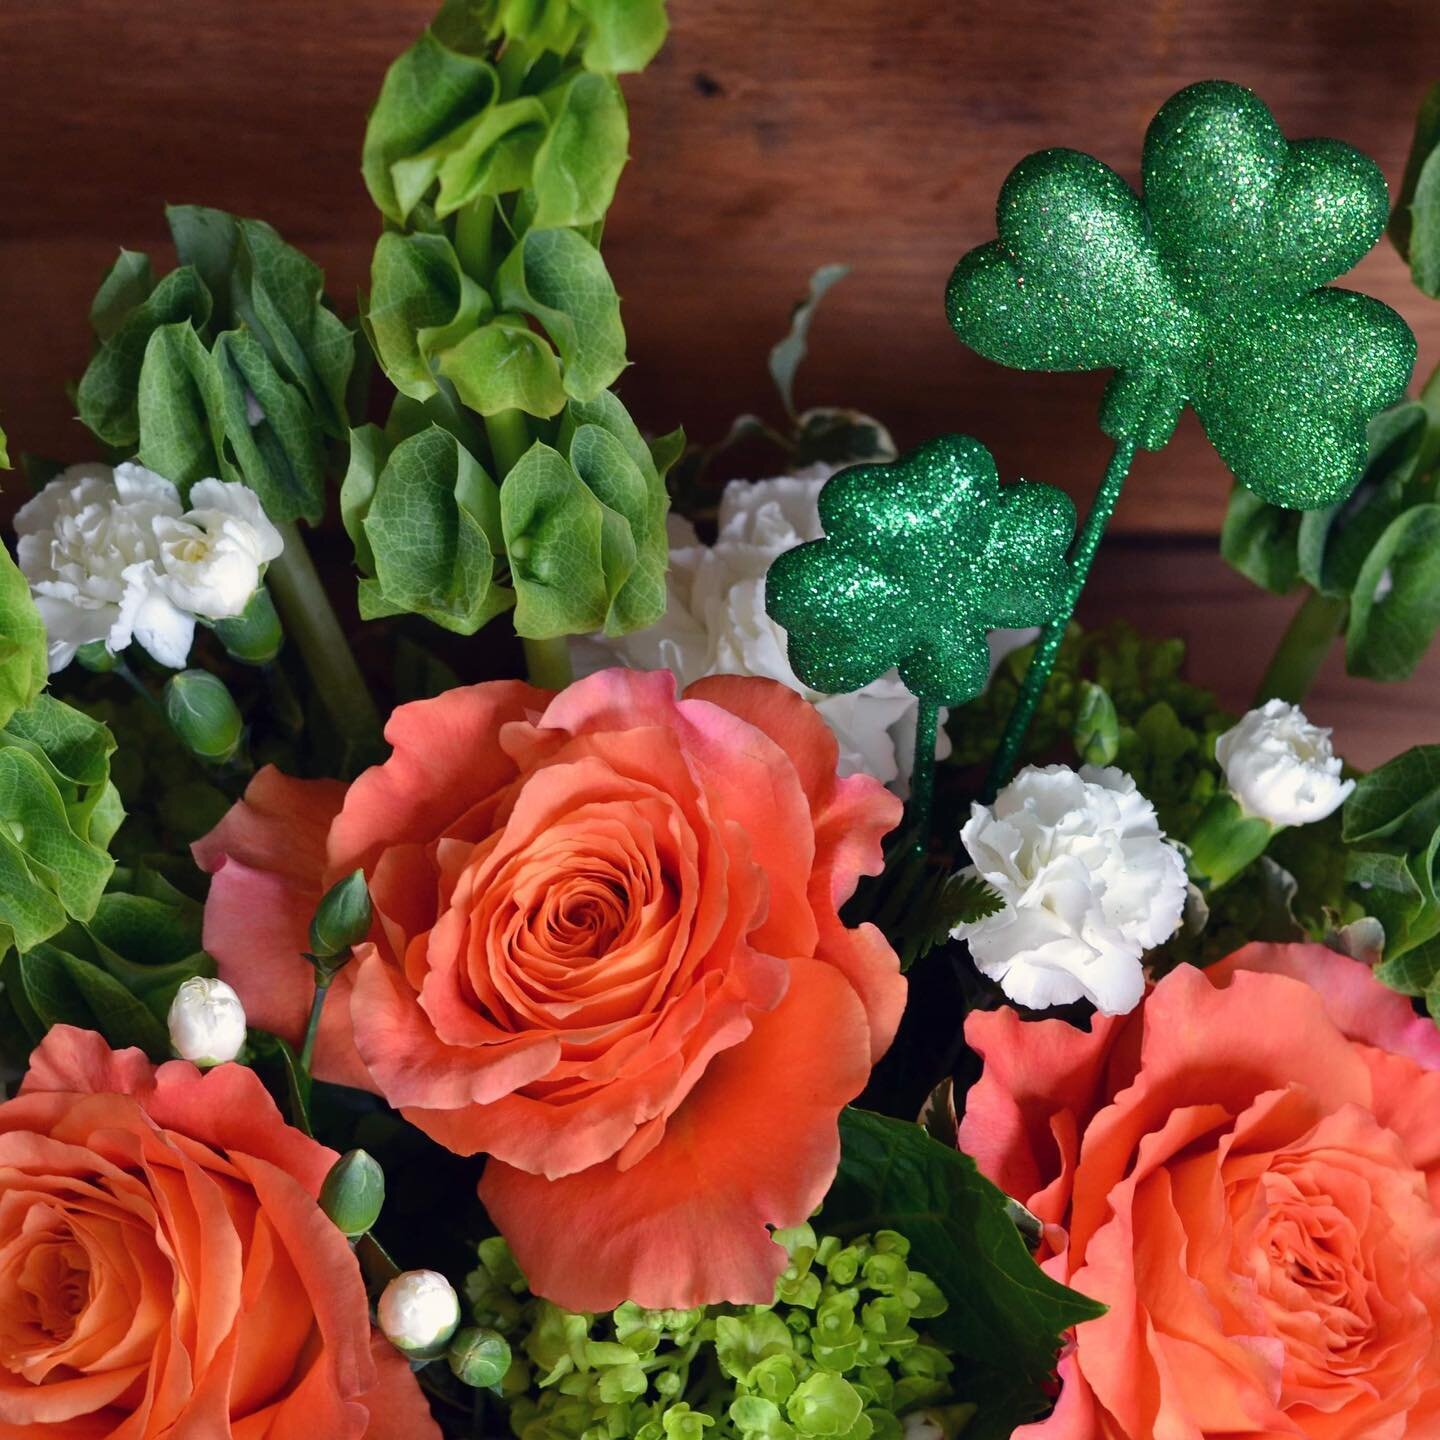 Our designers would like to wish you a year of good fortune and health. Send this beautiful bouquet to somebody special, in celebration of the Irish St. Patrick`s Day. This cottage box is filled with a medley of Ombre Free Spirit Garden Roses, lavish